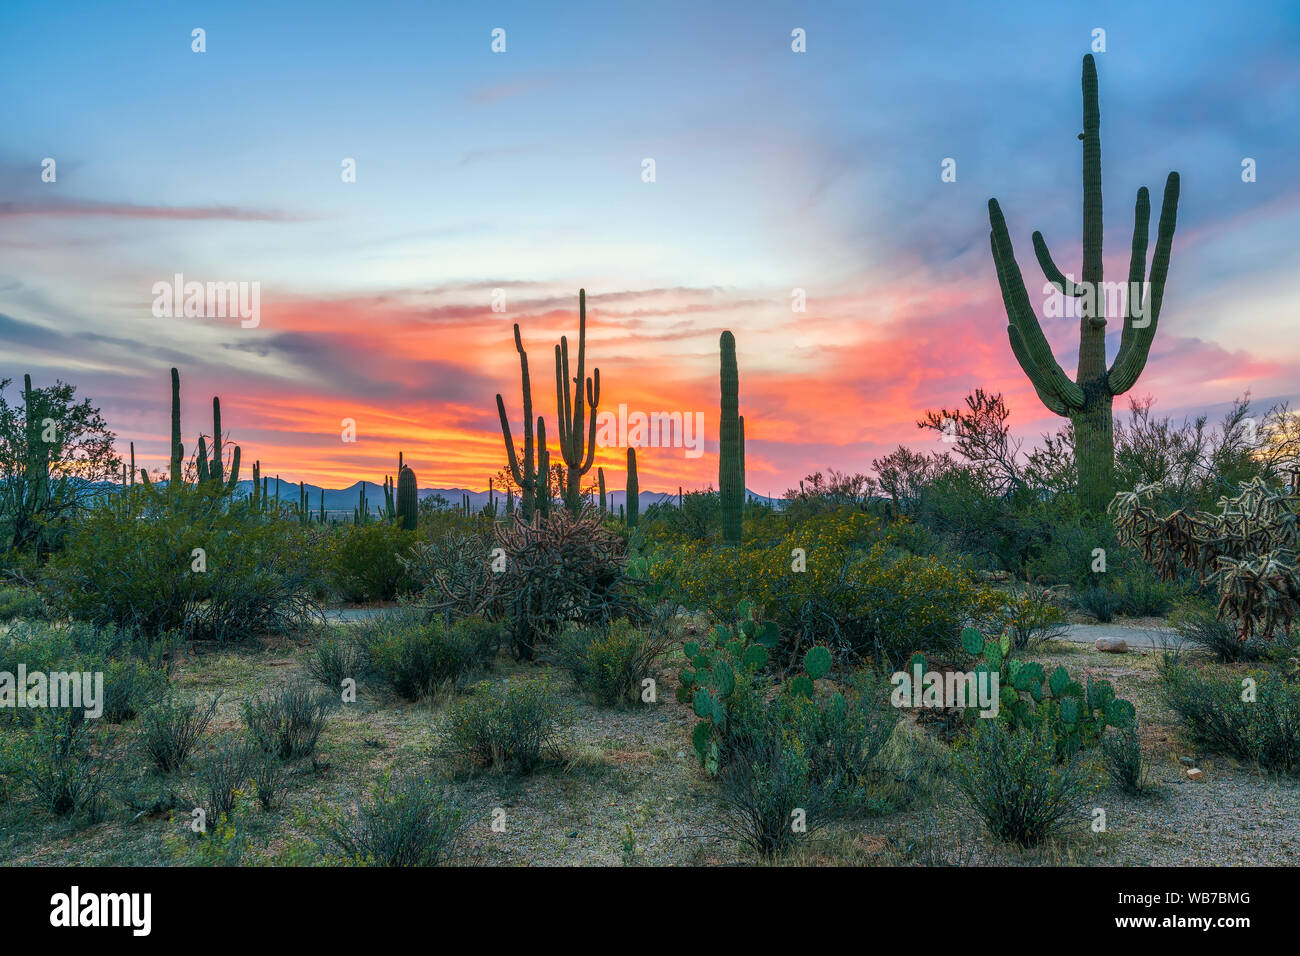 Sunset in Saguaro National Park with Saguaros in the foreground. Arizona. USA Stock Photo